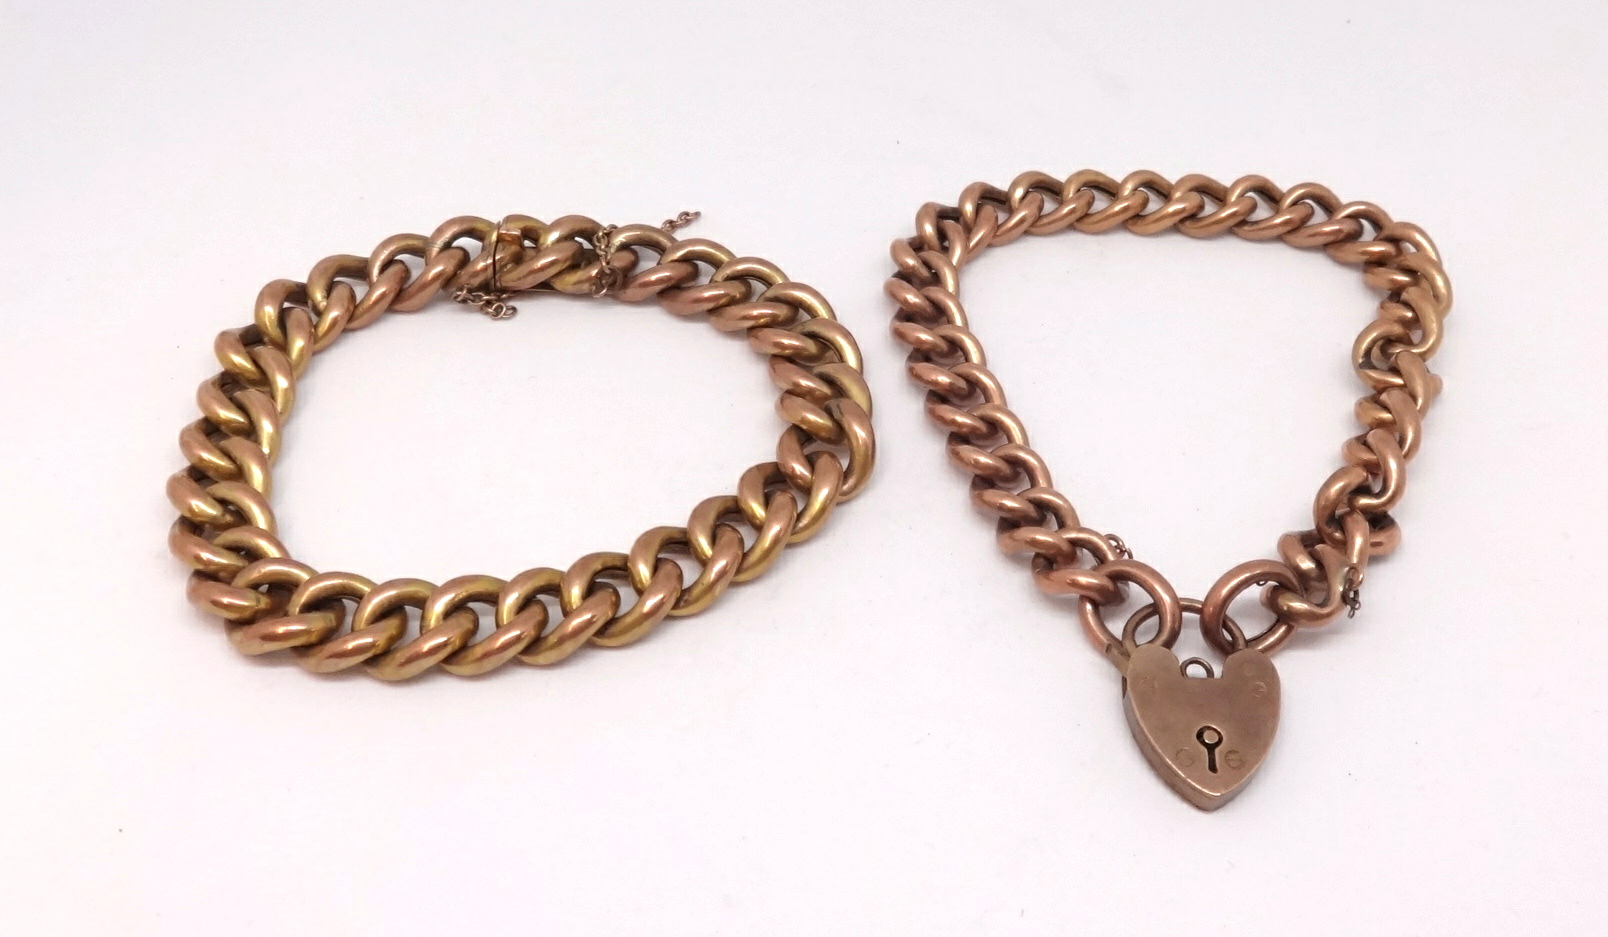 A 9ct gold bracelet with padlock (16.70g) together with a mixed colour y/m bracelet marked 9c? (17.